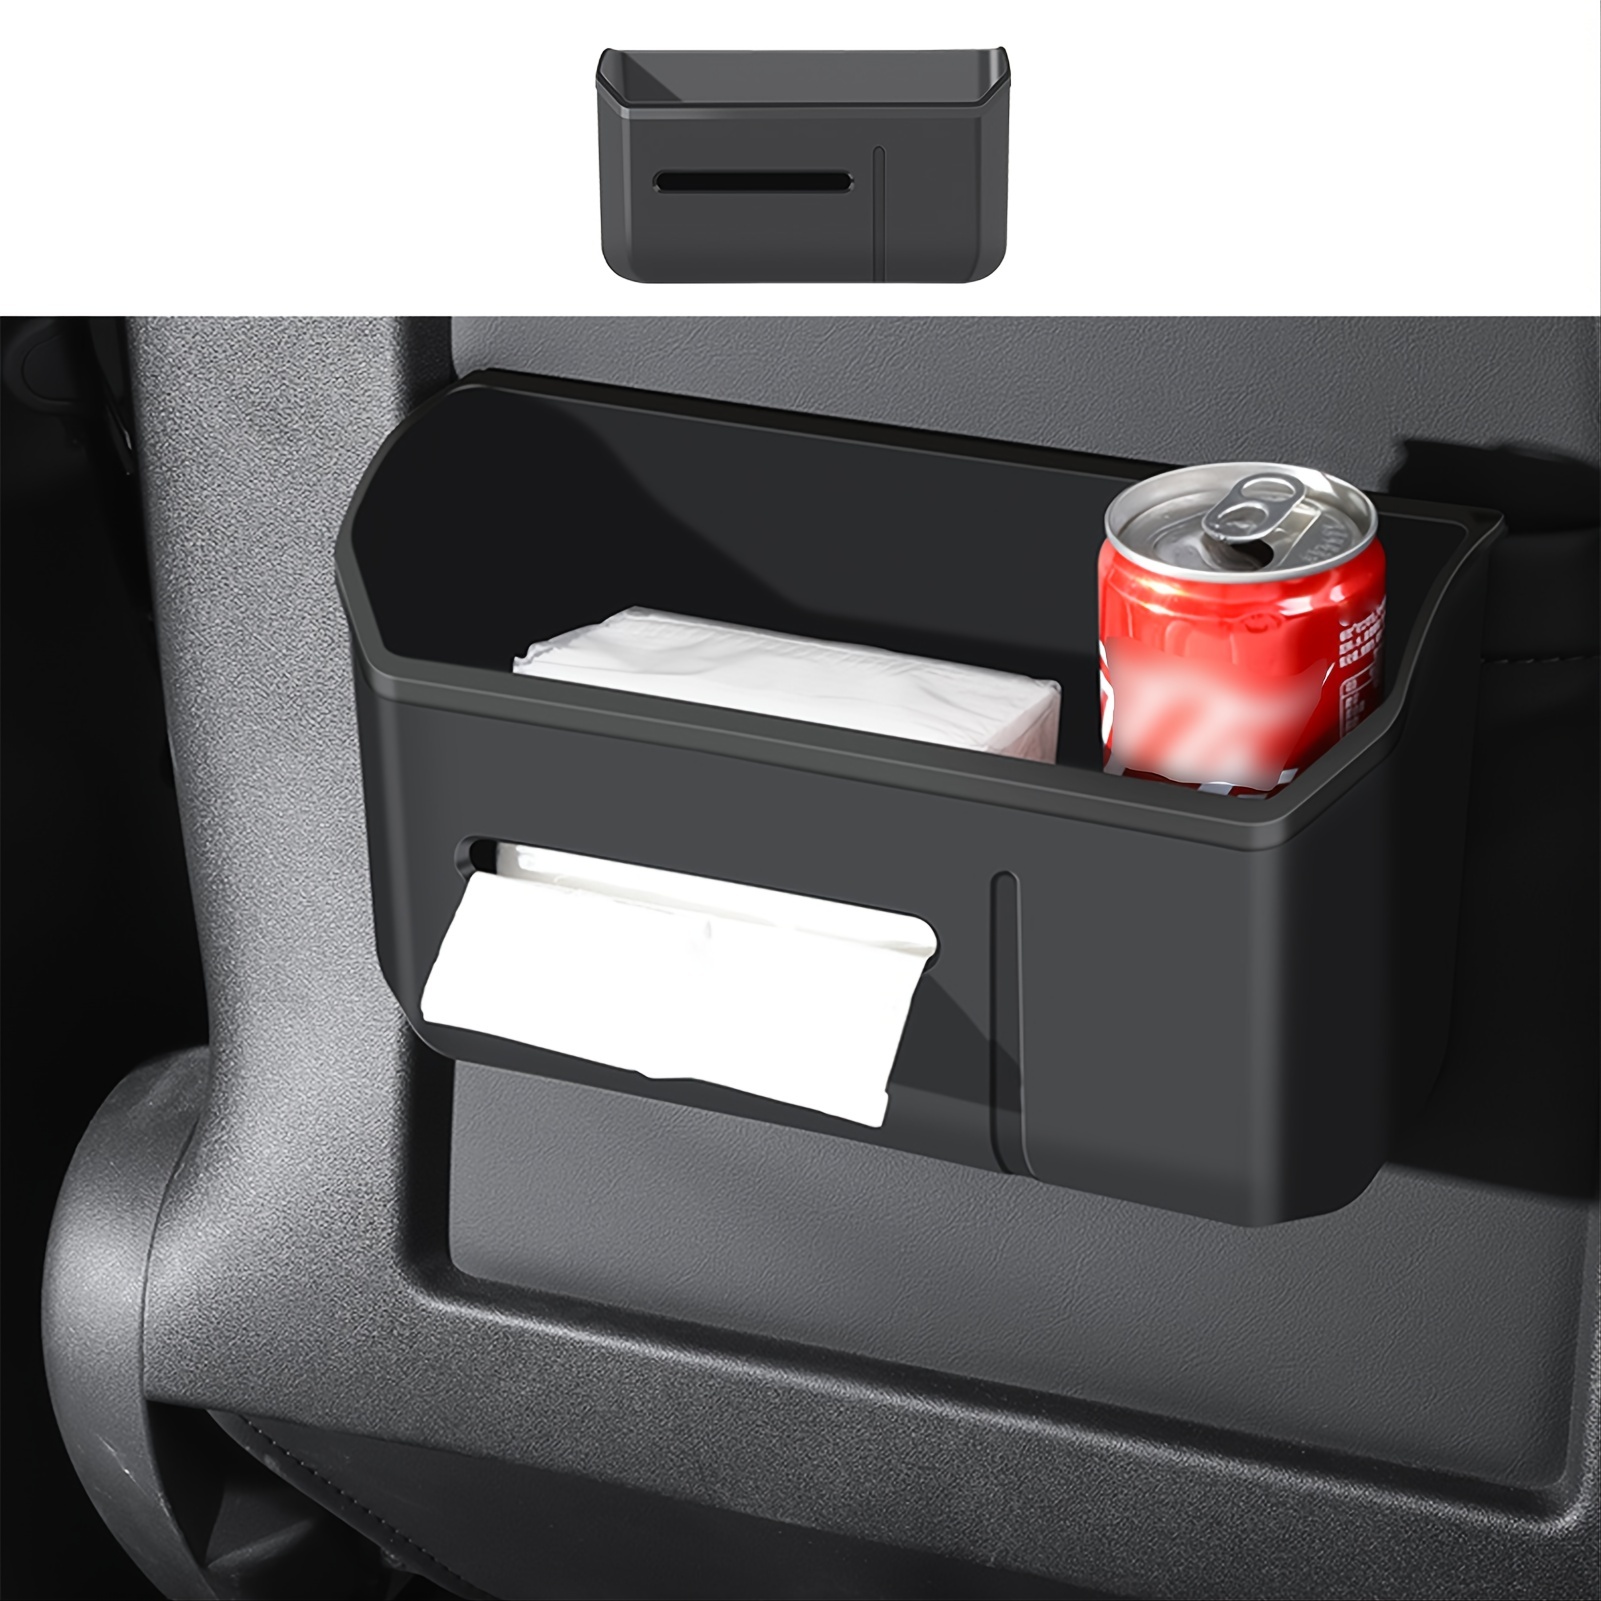 Maximize Your Model 3/Y Interior Space with this Car Back Seat Pocket  Storage Box Organizer Tray!